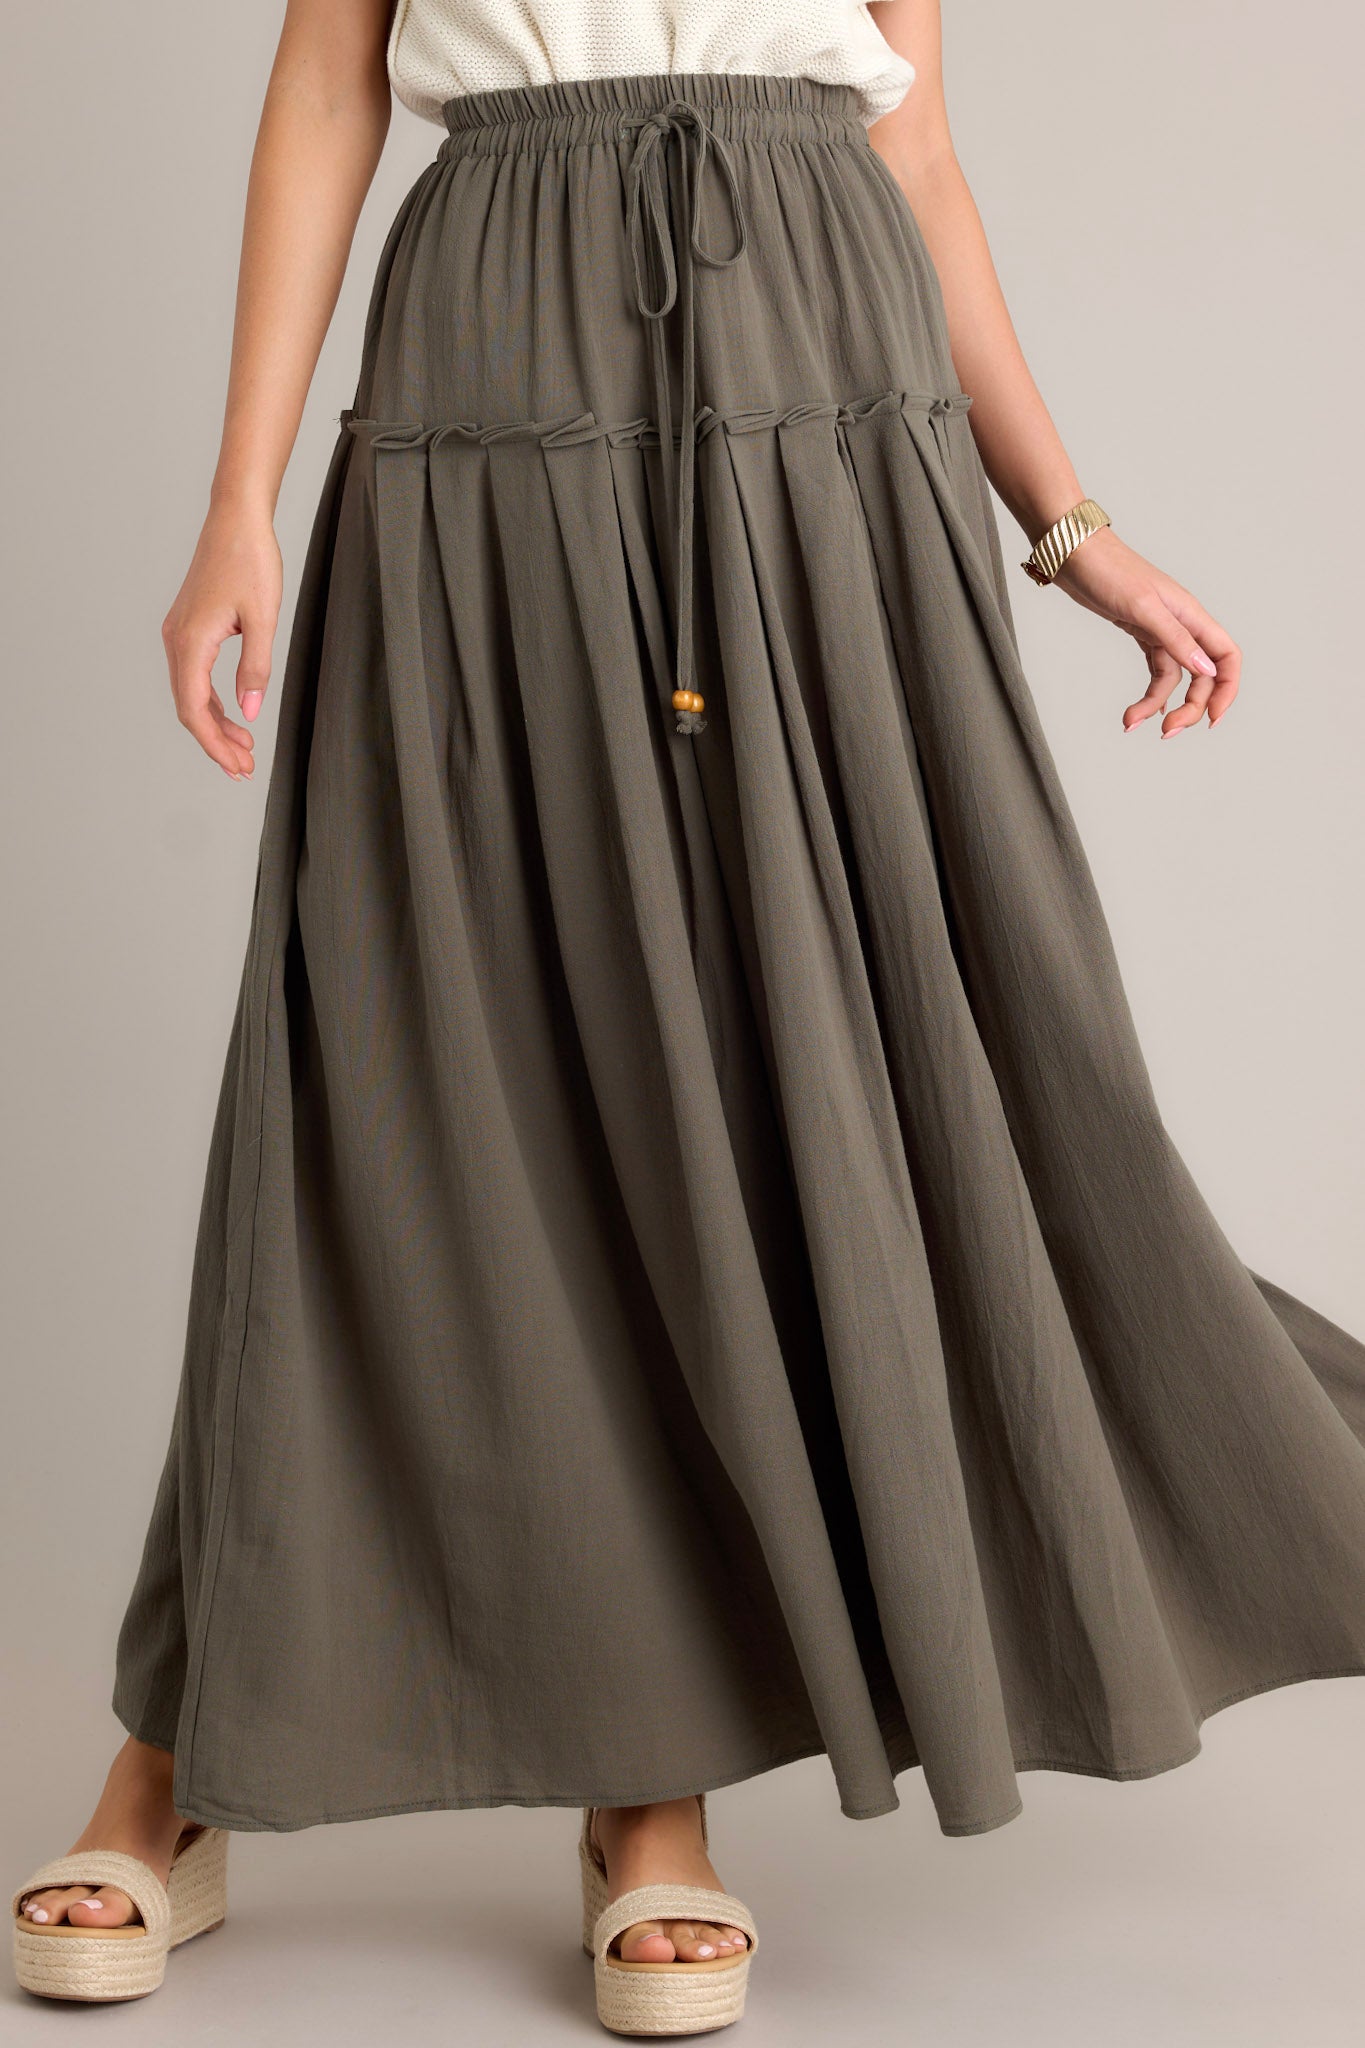 Front view of an olive maxi skirt featuring a high waisted design, an elastic waistband, a self-tie drawstring, a single tier, subtle pleats, and a flowing silhouette.